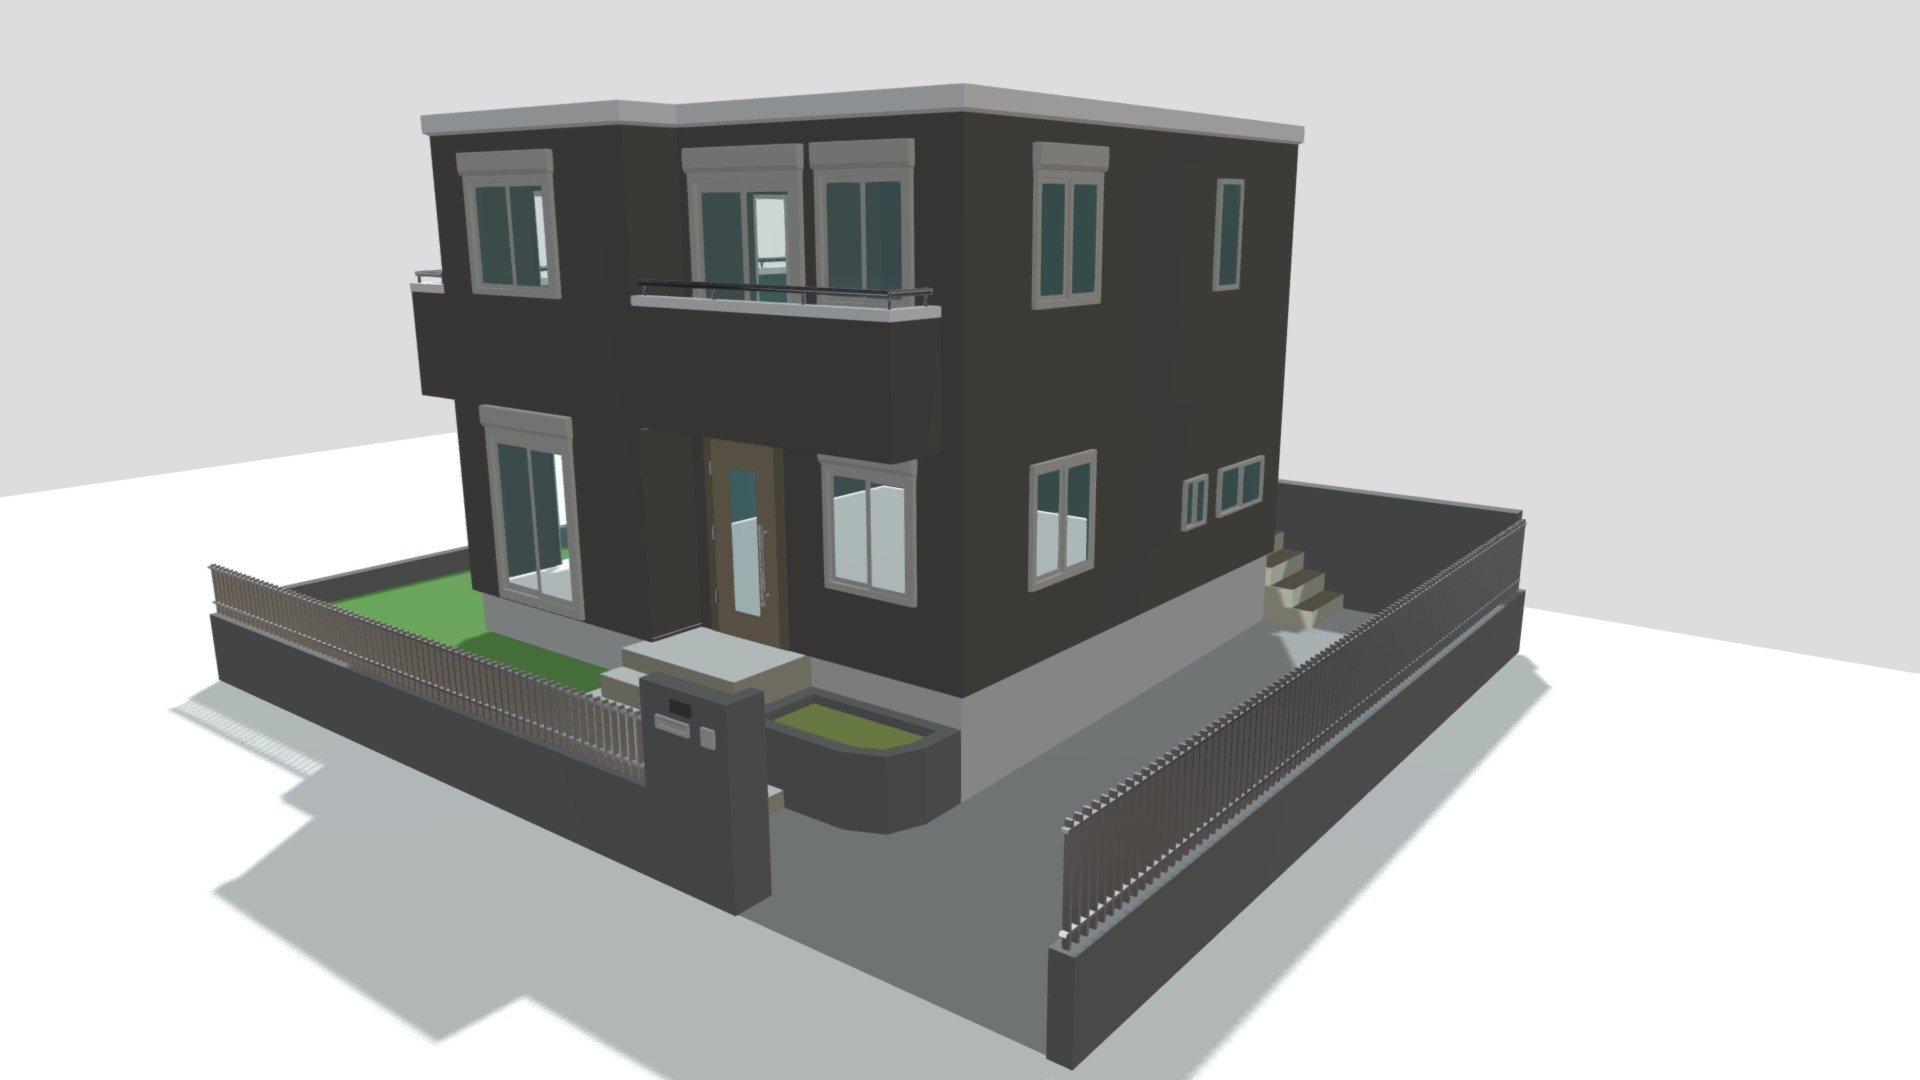 Tokyo Japanese House / Casa Japonesa [Low Poly]